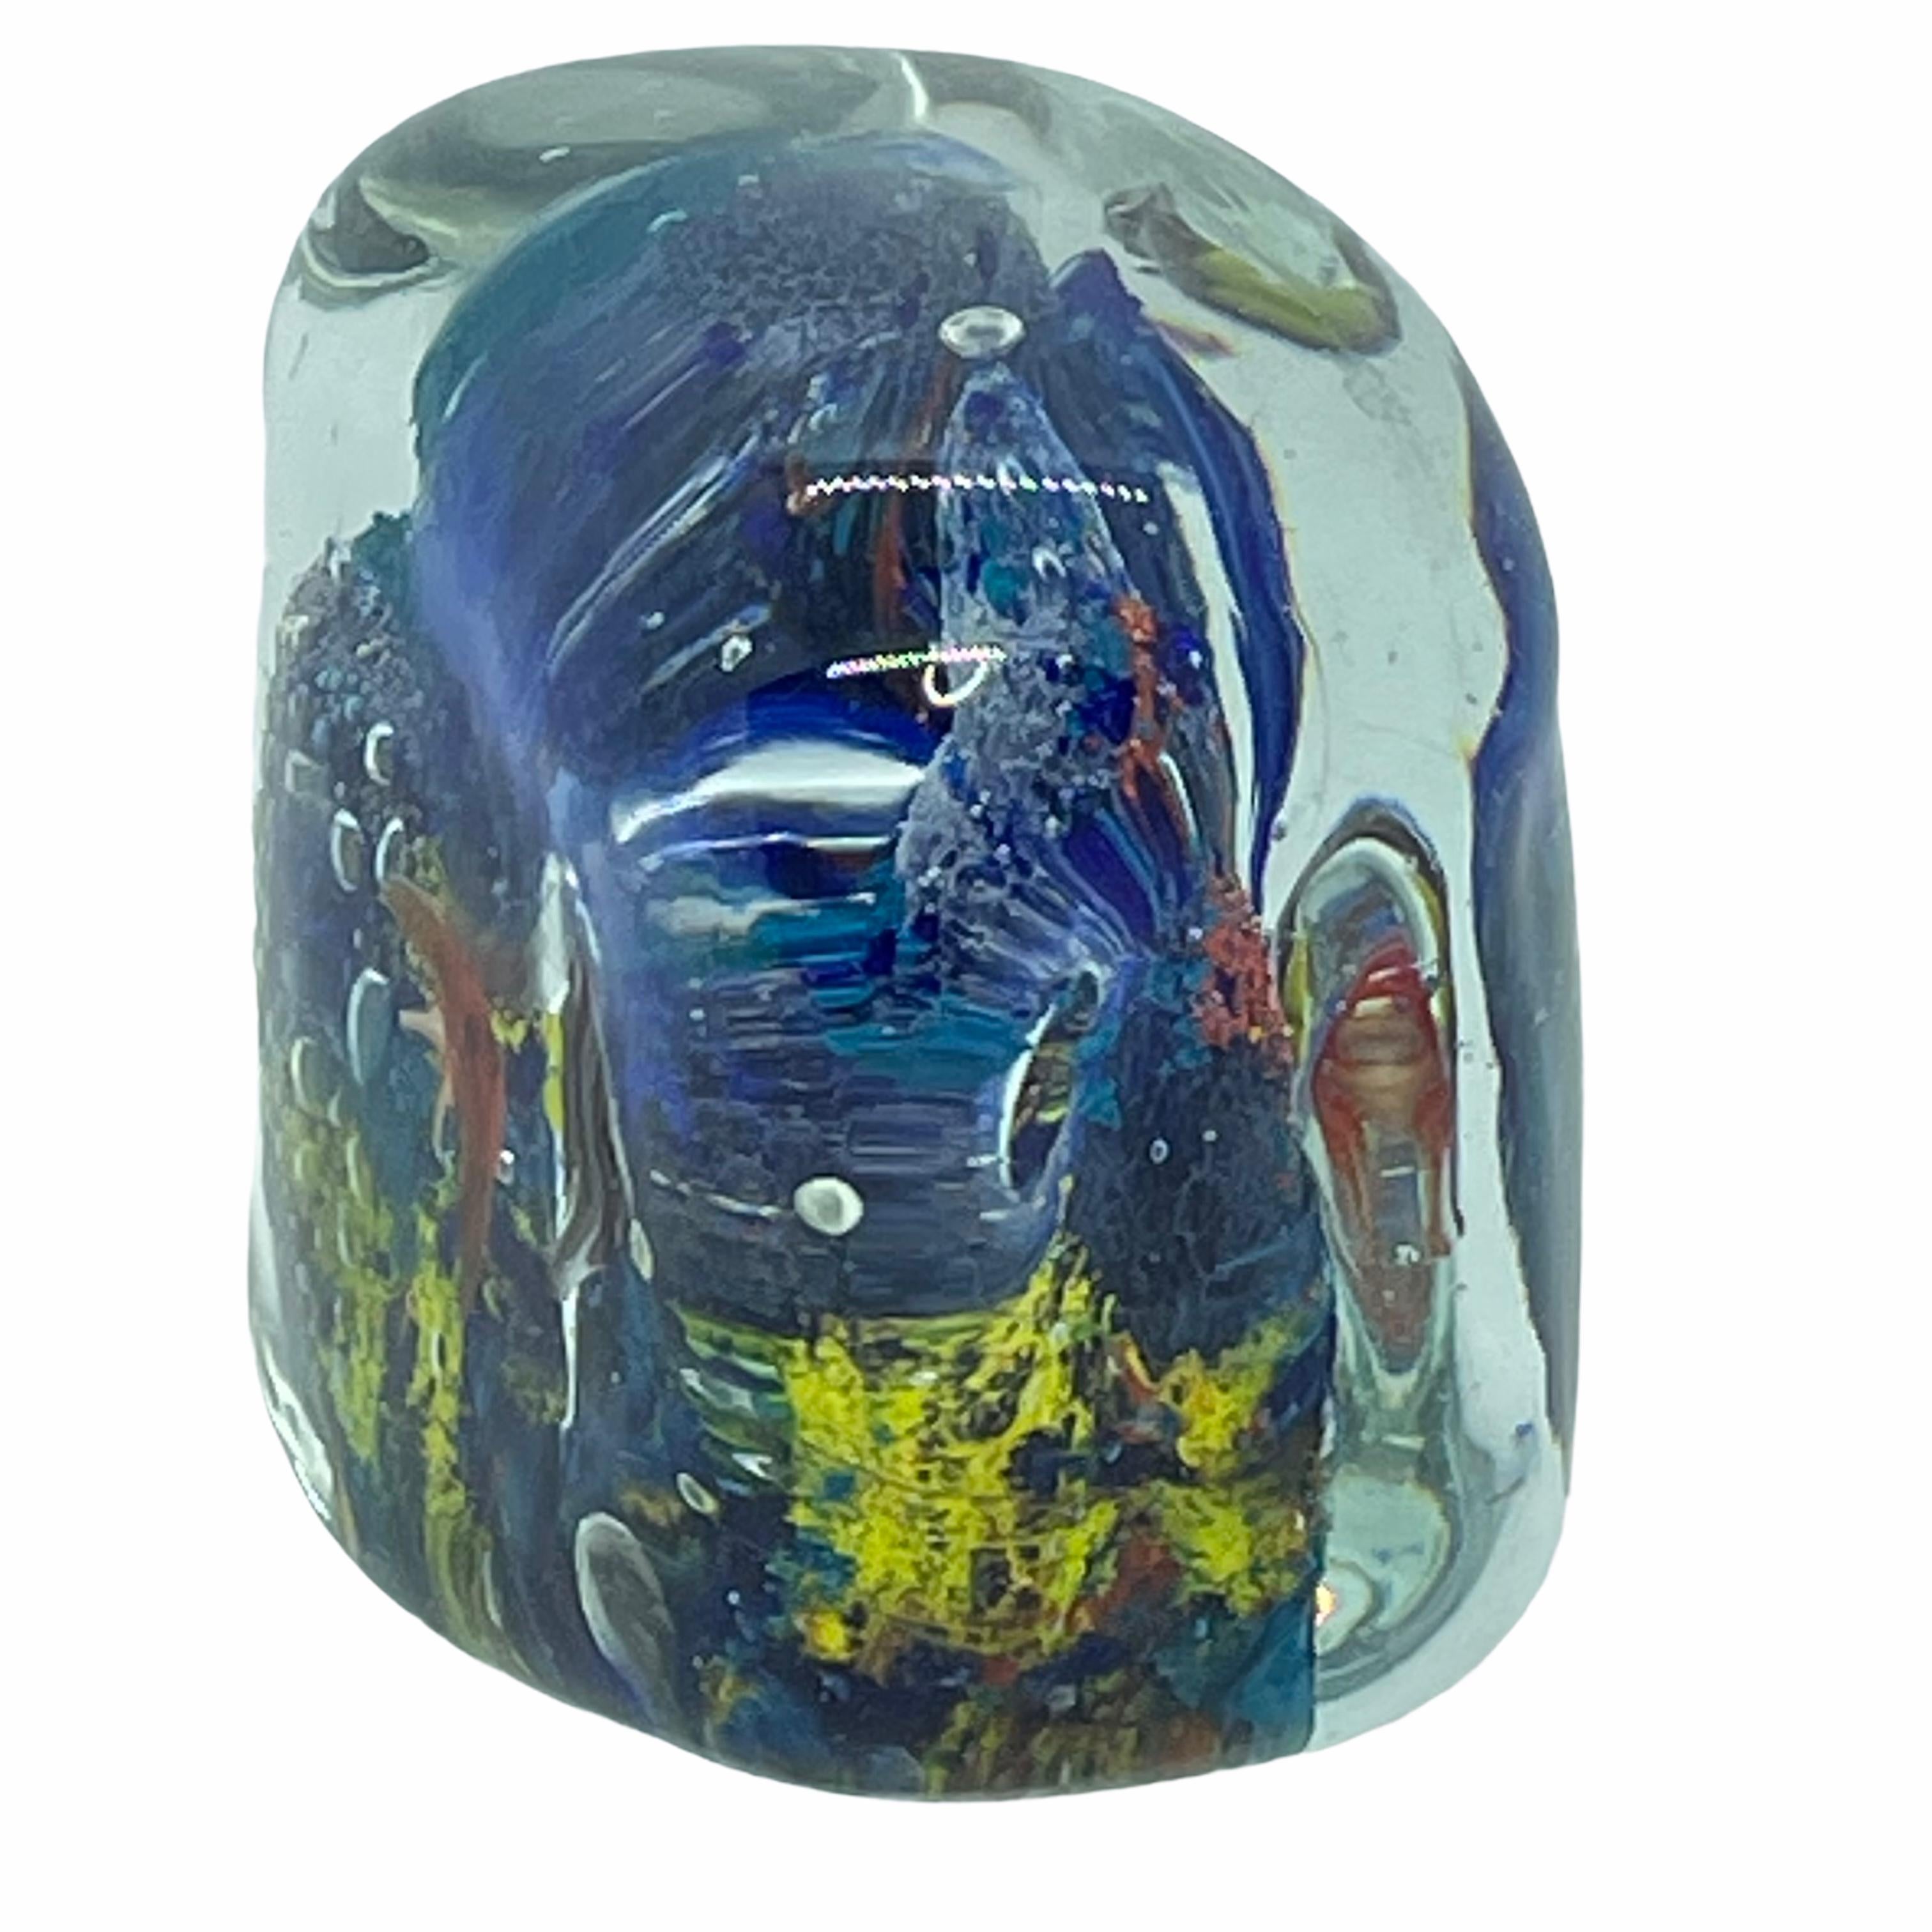 Beautiful Murano hand blown aquarium Italian art glass paper weight. Showing some multicolored fishes, floating on controlled bubbles. Colors are a blue, orange and clear. A beautiful nice addition to your desktop or as a decorative piece in every